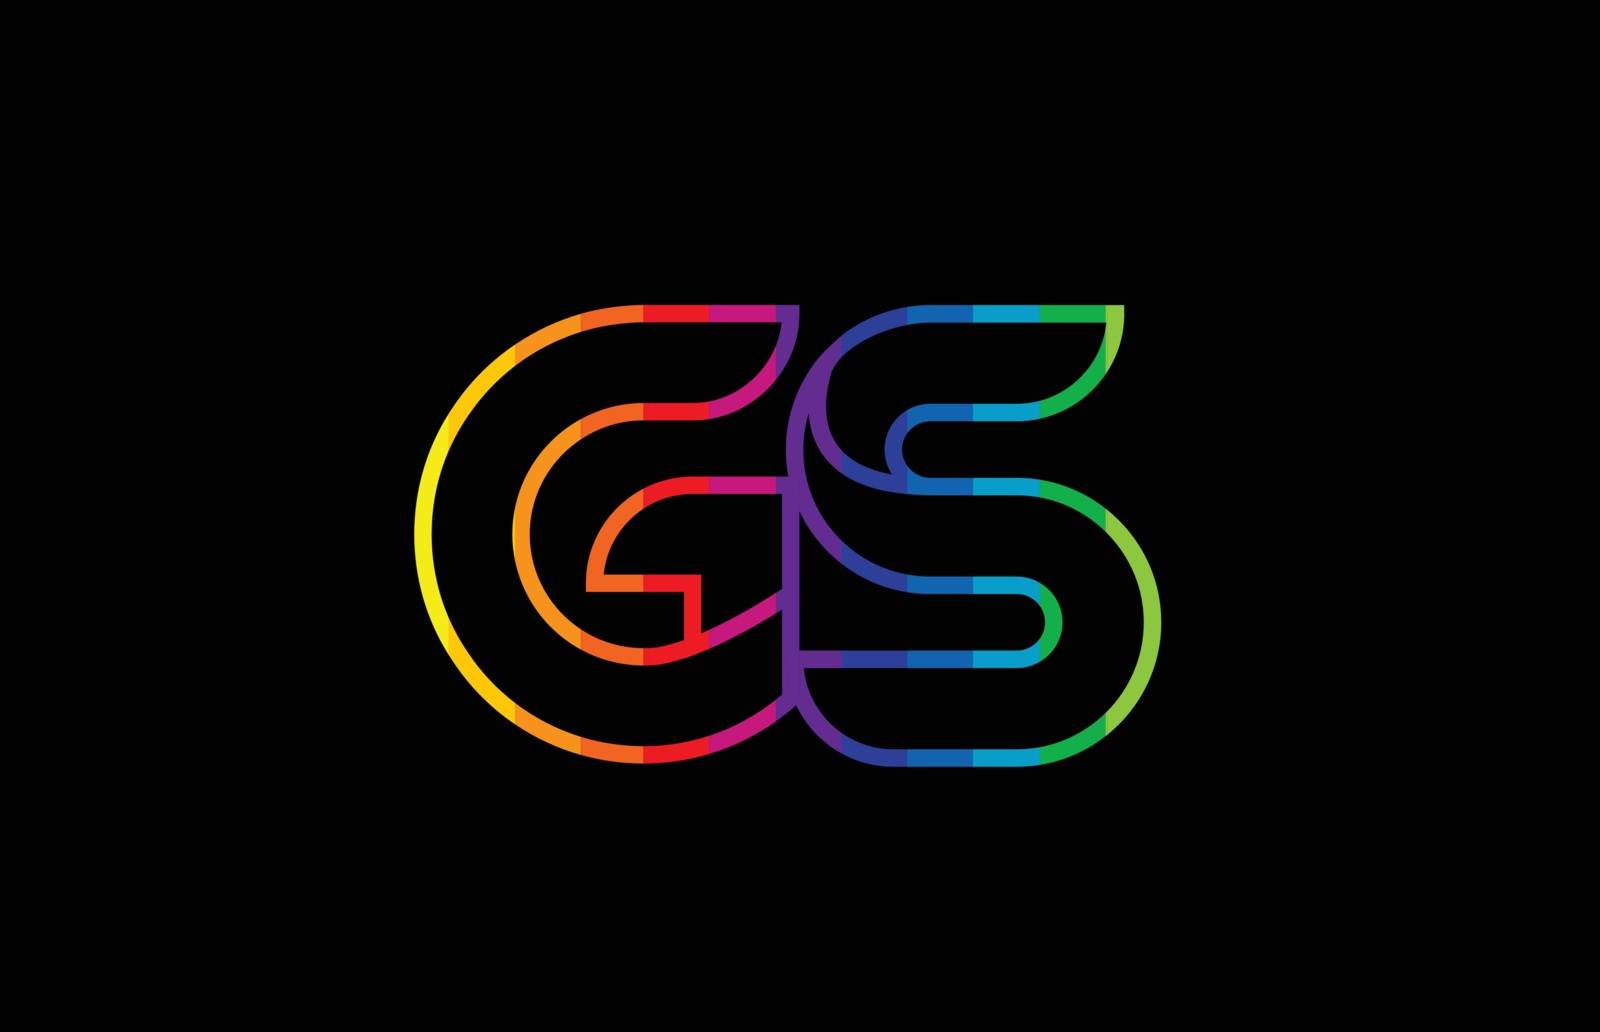 rainbow color colored colorful alphabet letter gs g s logo combination design suitable for a company or business